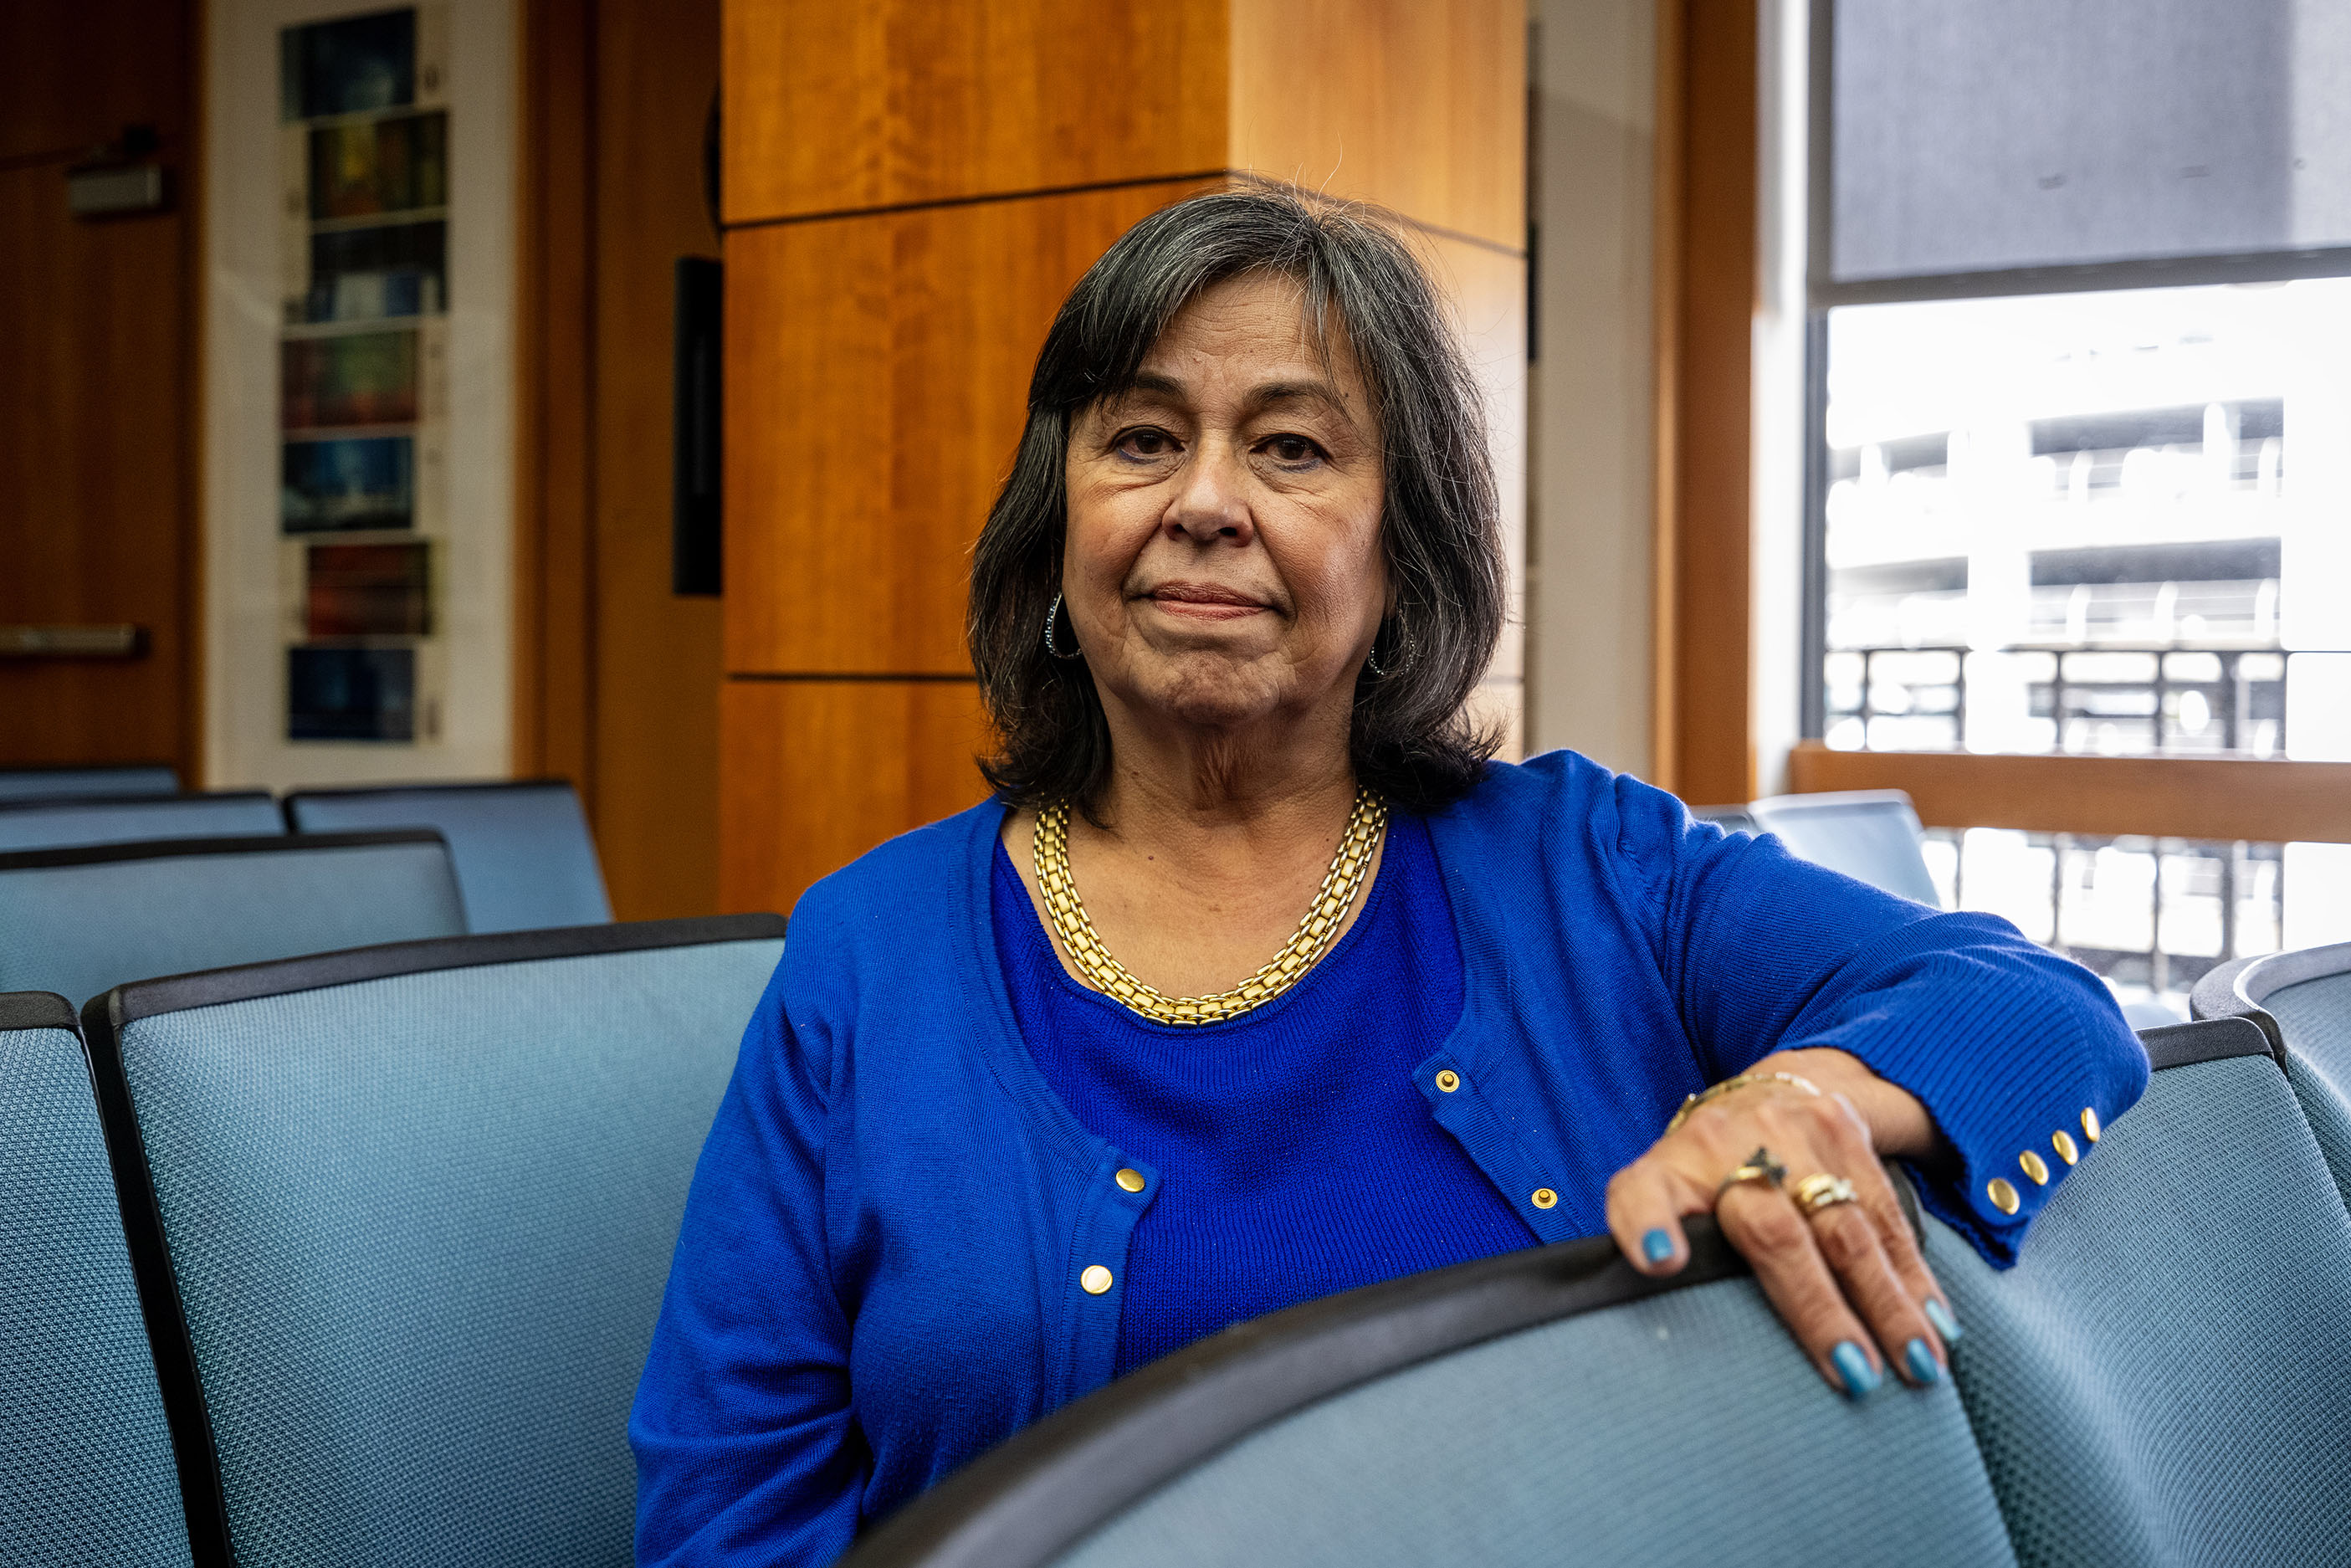 A portrait of Jane Garcia. She sits between rows of blue padded chairs in a professional setting.